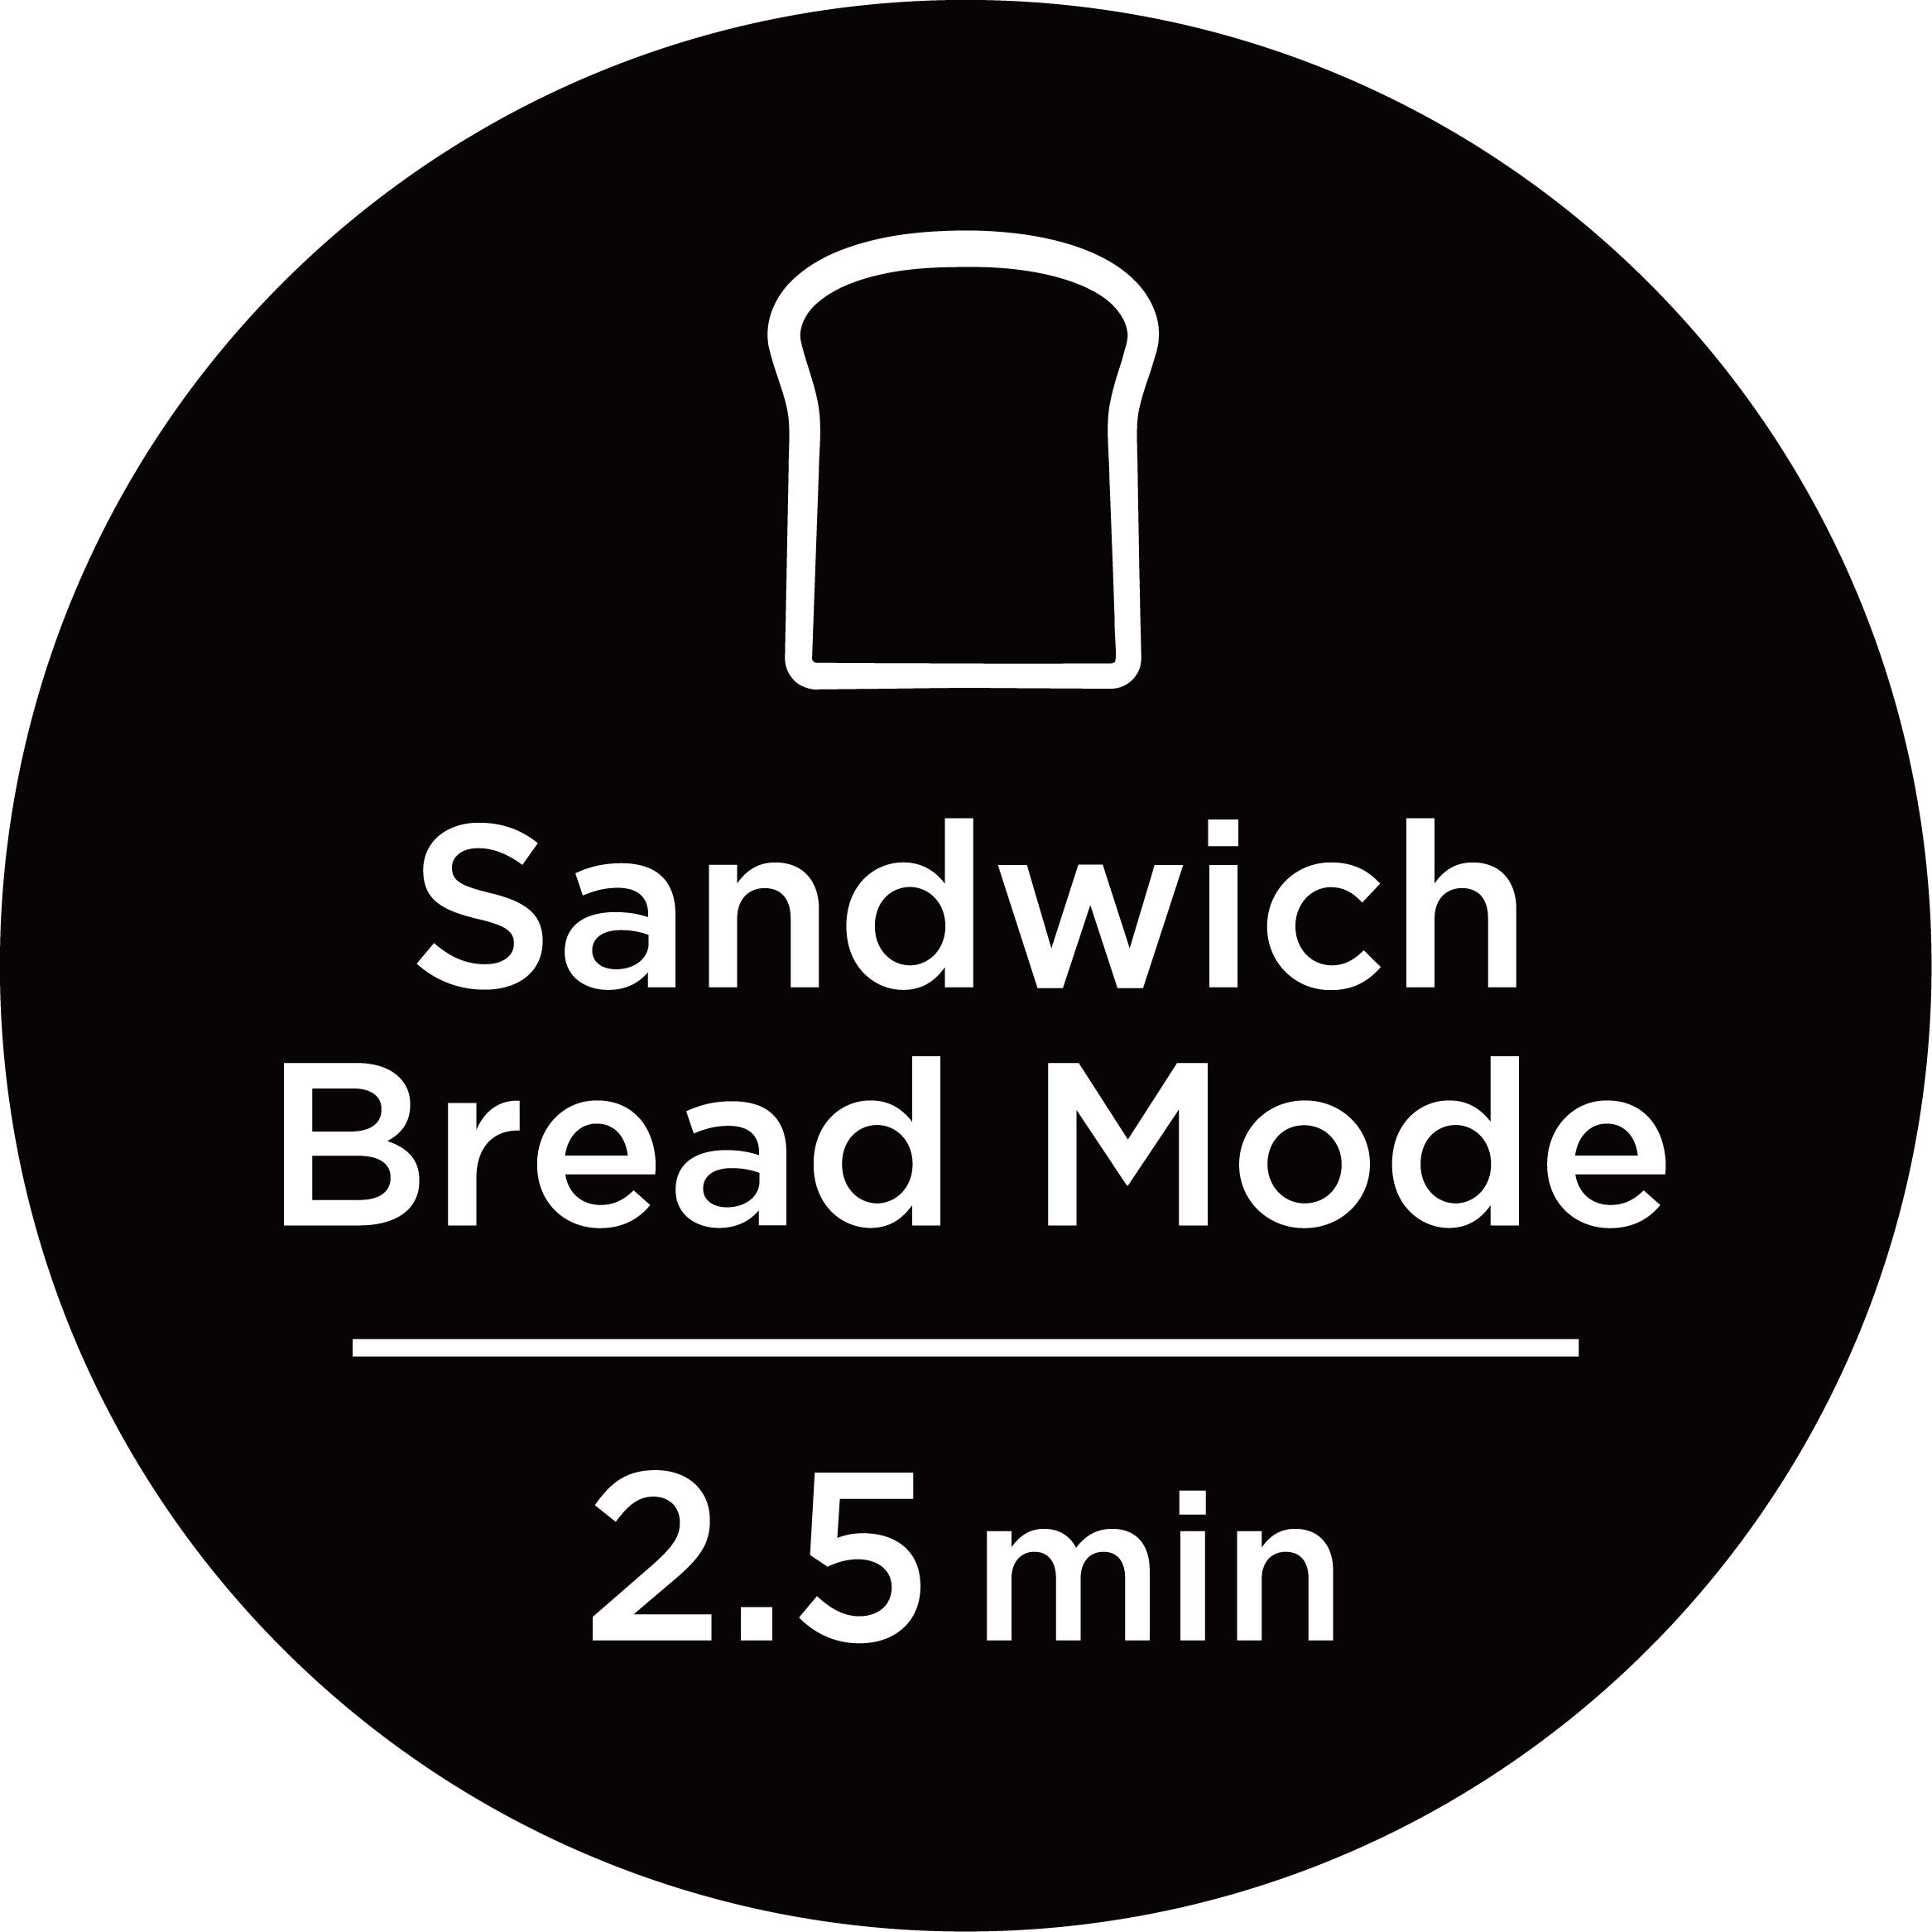 Sandwich Bread Mode for 2.5 minutes